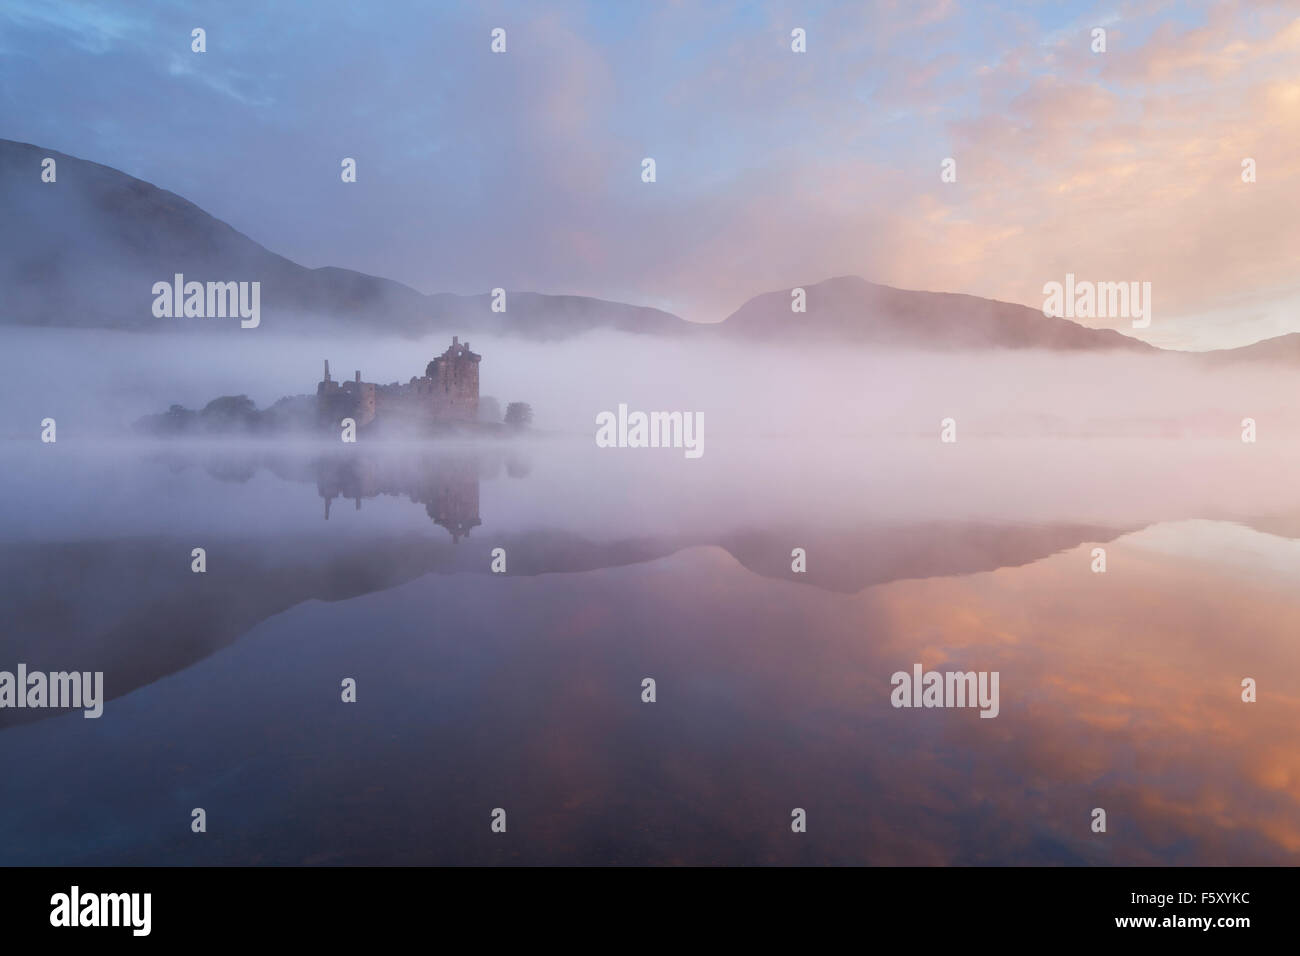 Kilchurn Castle and Loch Awe viewed through the mist at sunrise, Kilchurn Bay, Argyll and Bute, Highlands, Scotland. Stock Photo